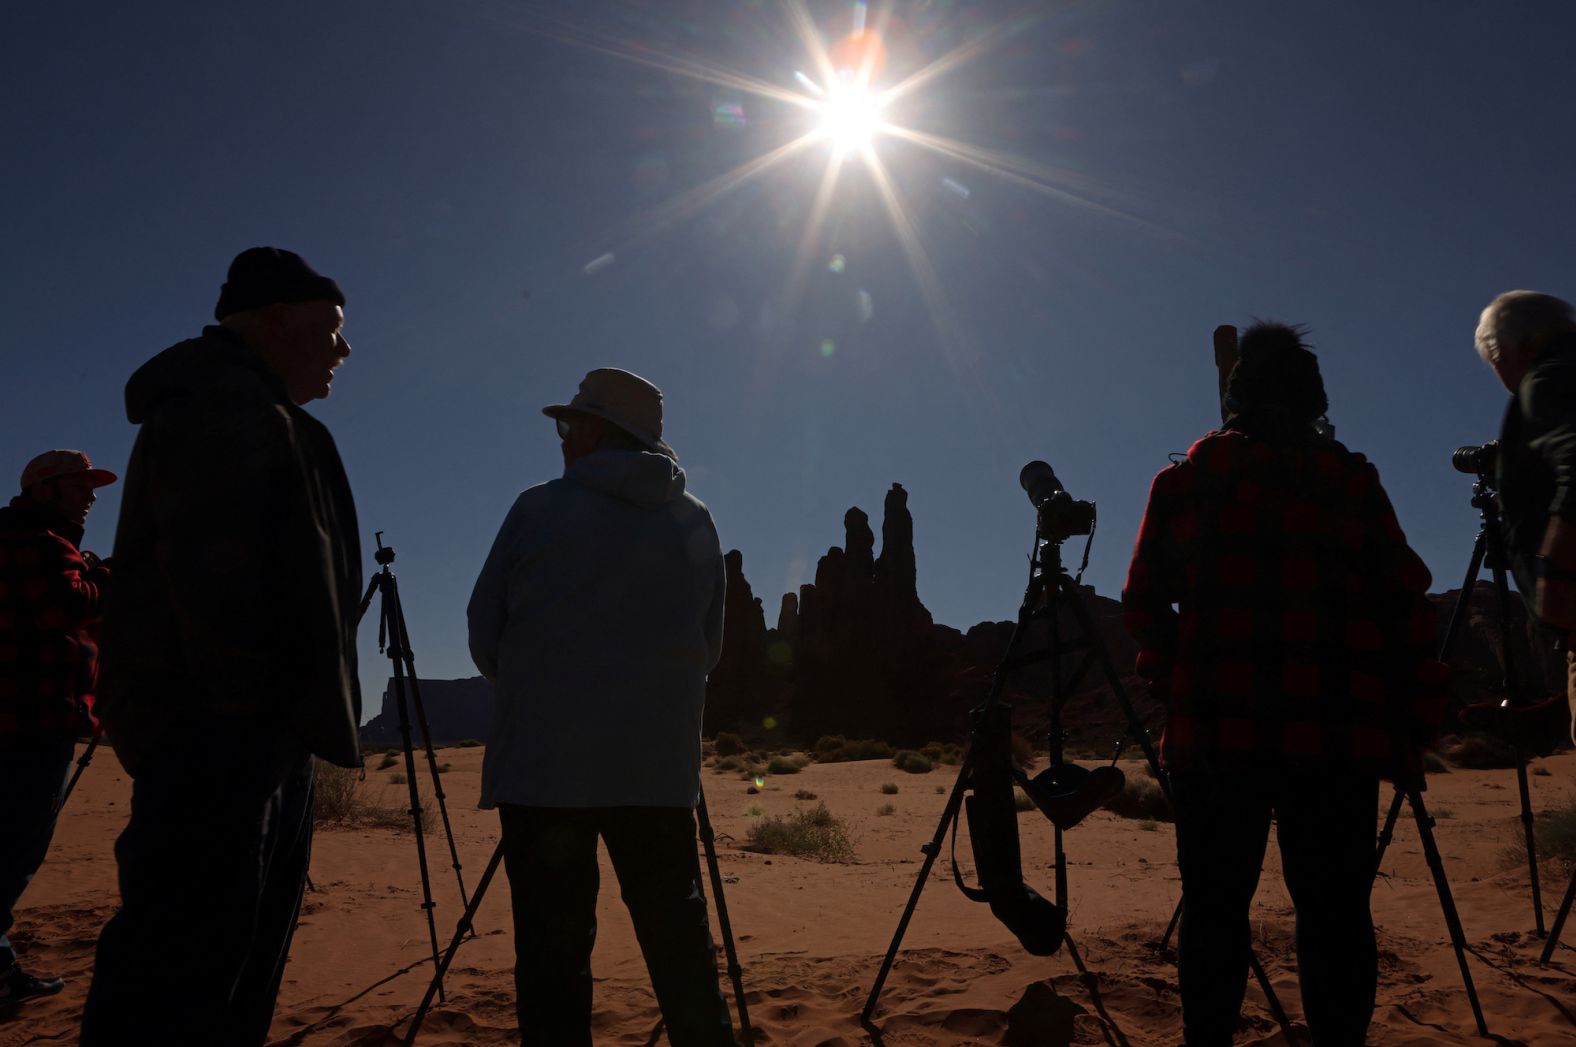 People gather to watch the eclipse at Monument Valley in the Navajo Nation, Arizona.